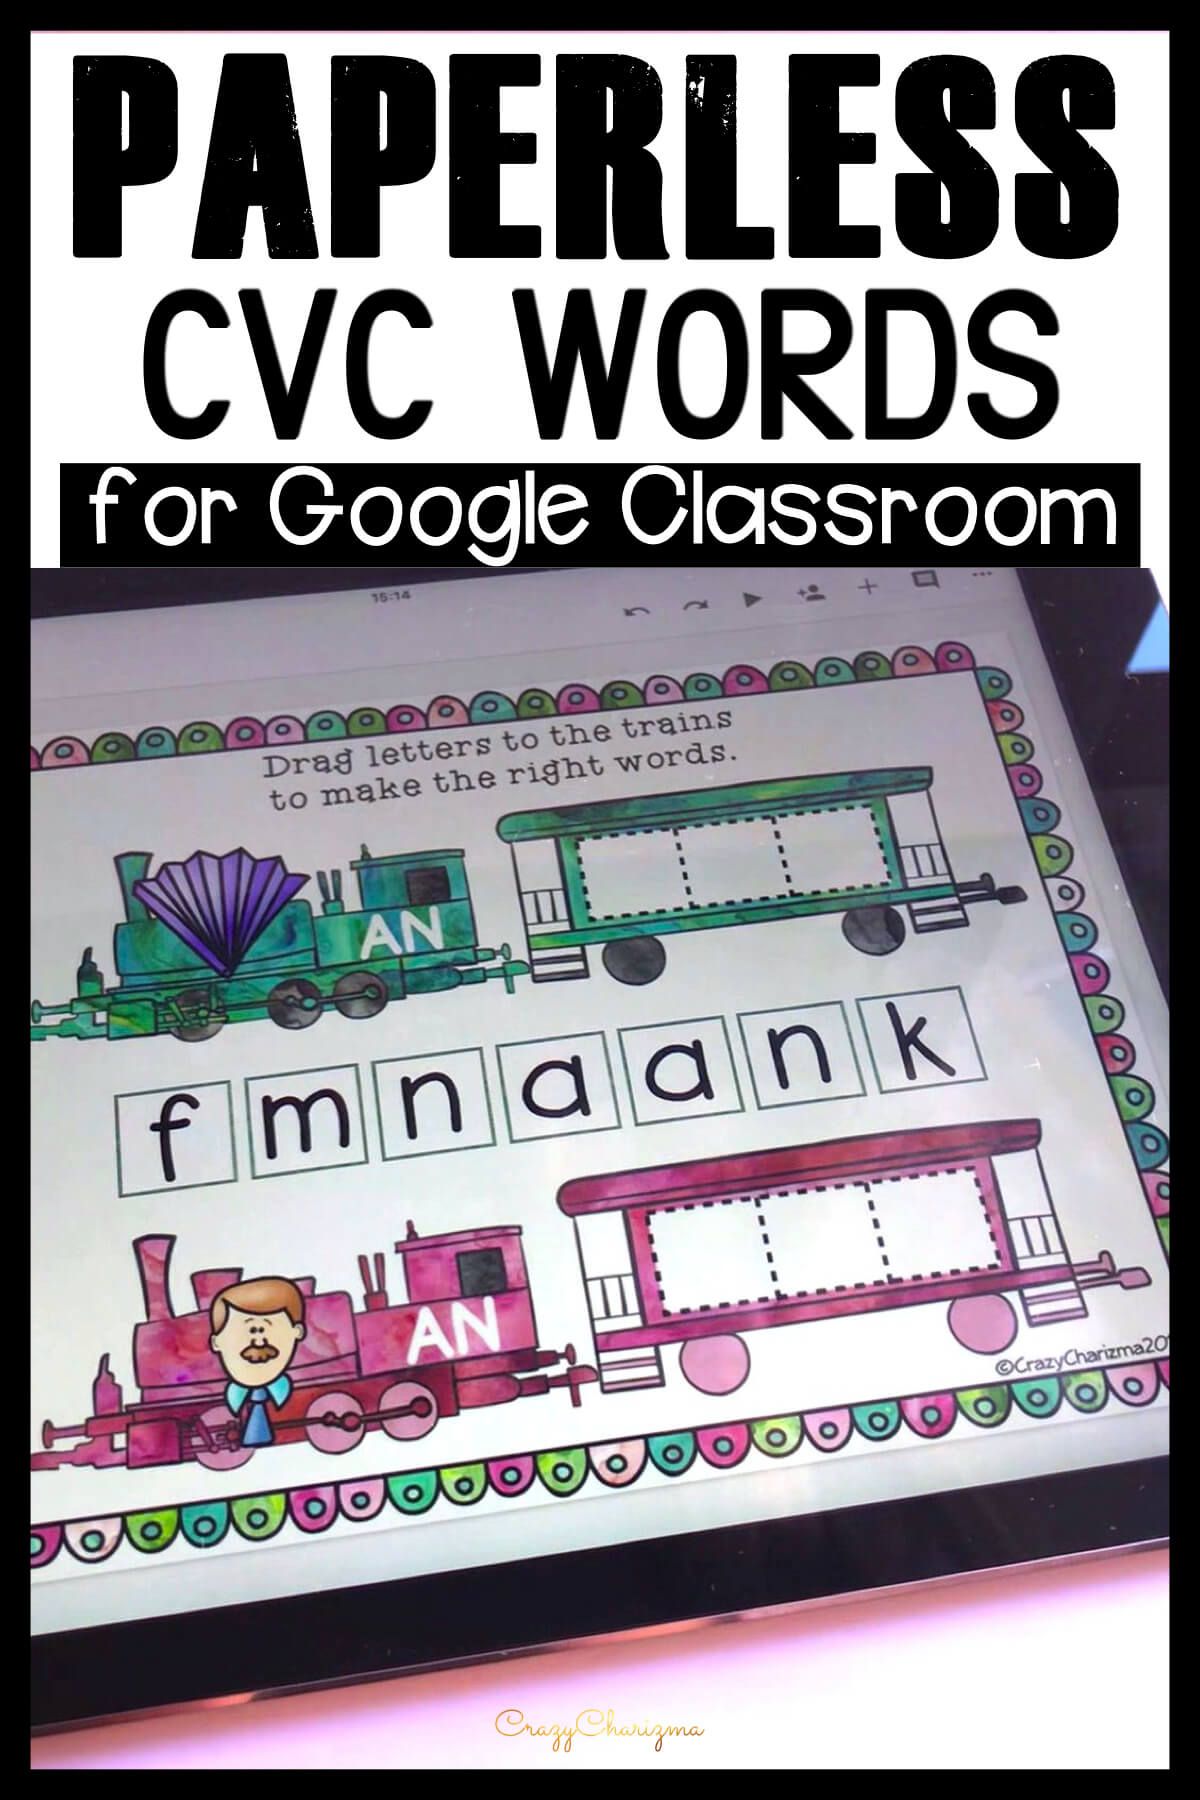 Grab this digital word work and get kids engaged with fun CVC words practice! Use during guided reading groups, literacy centers, 1:1 work, and for homework.